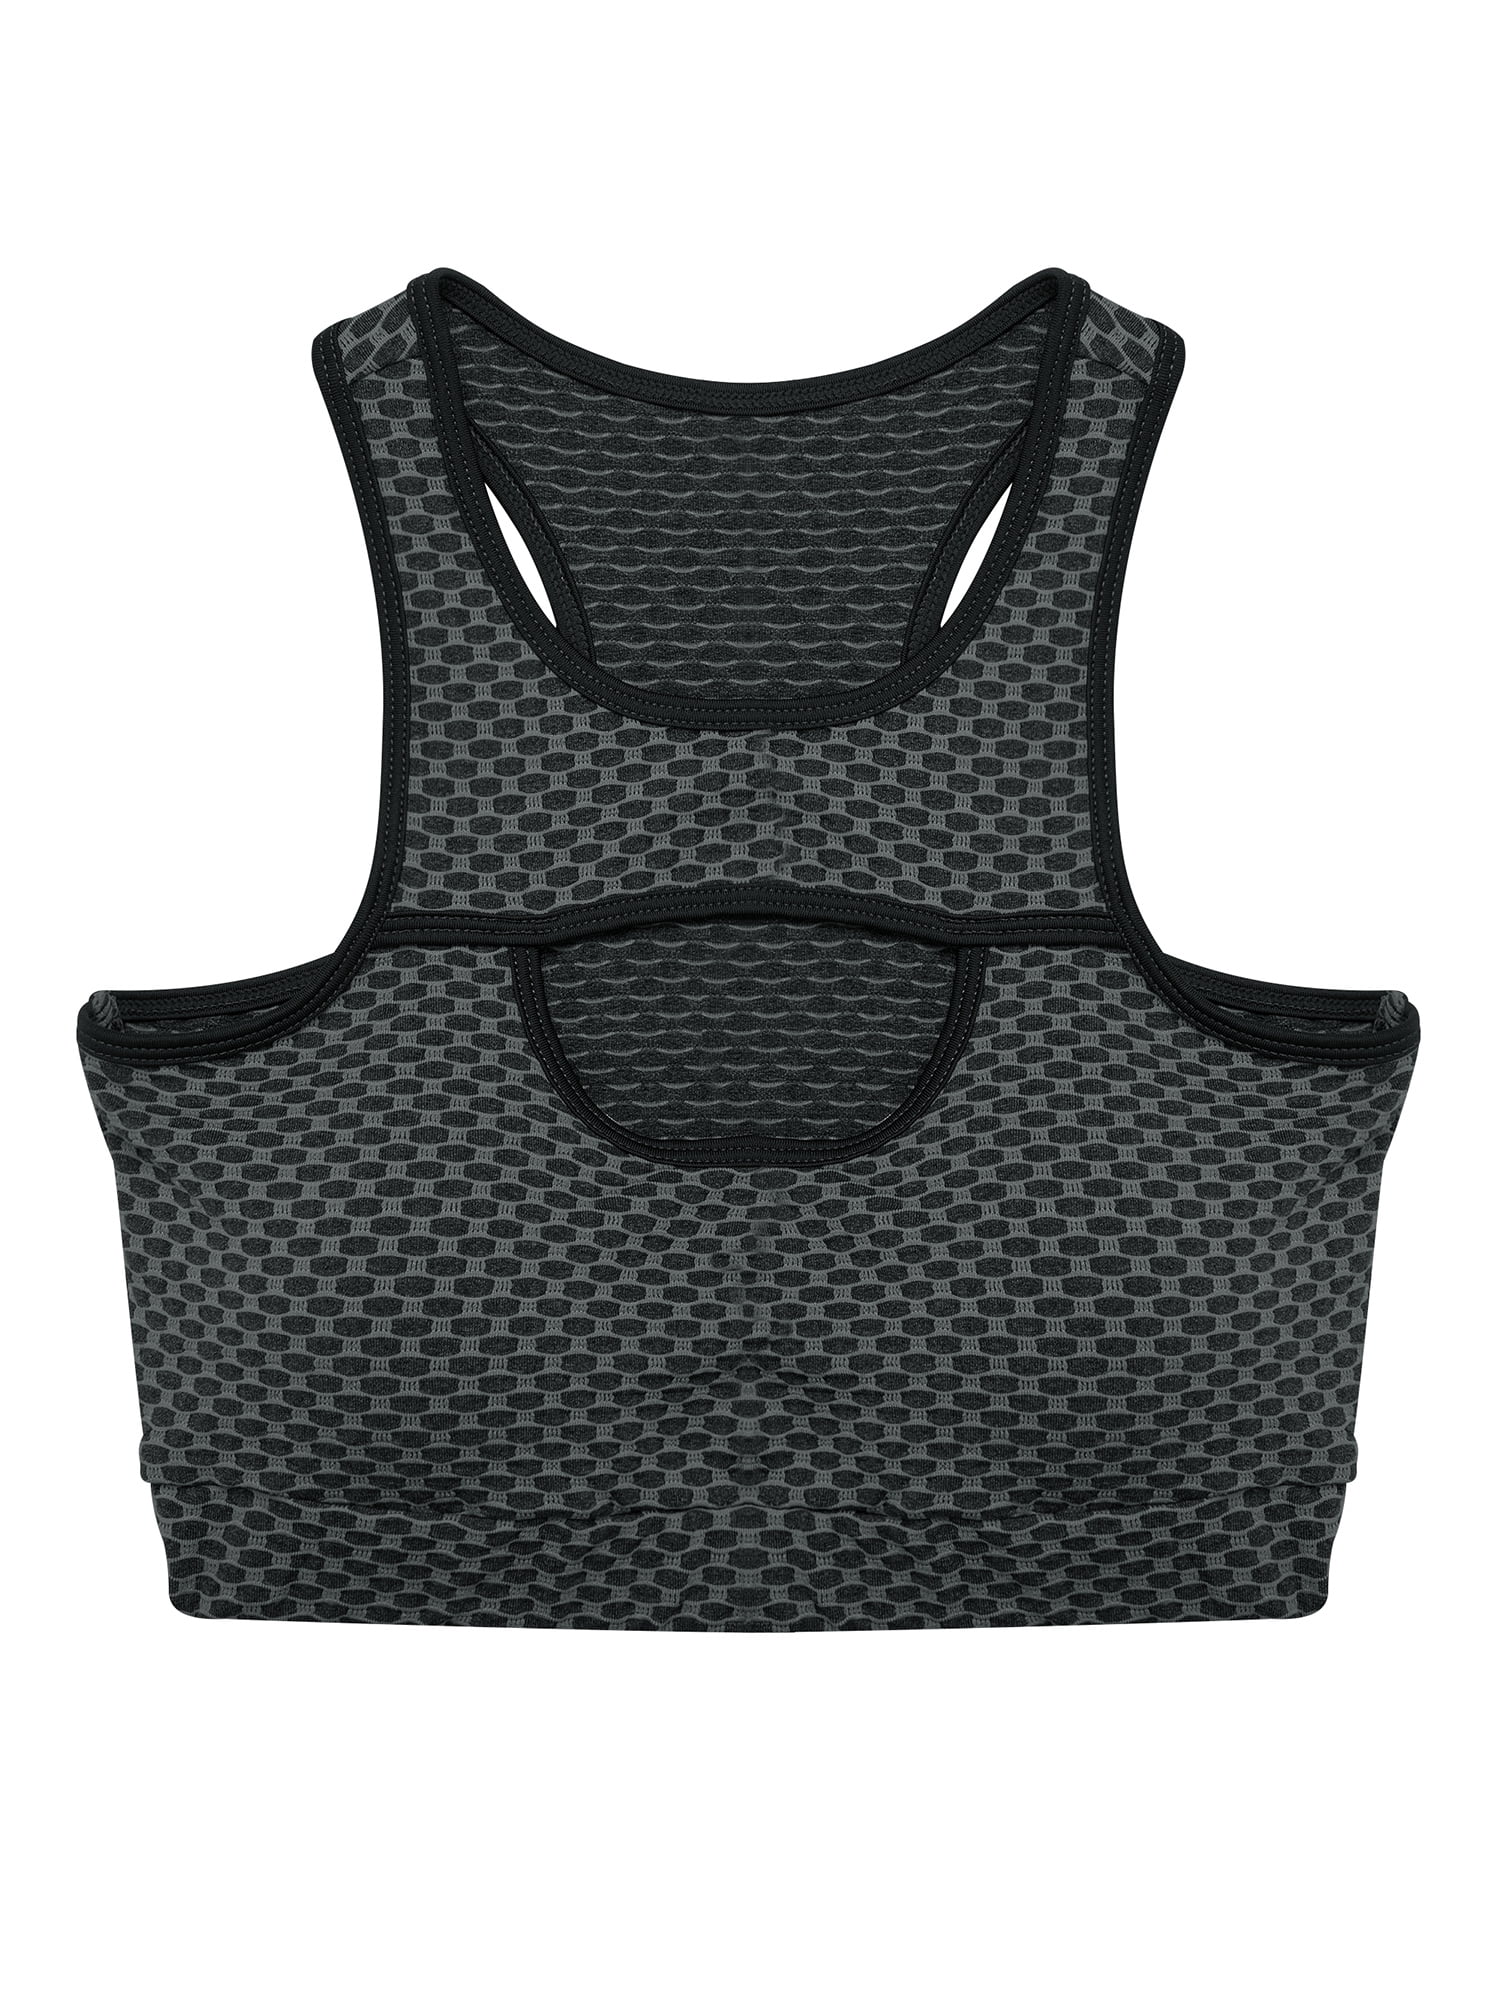 FOCUSSEXY Medium Support Sports Bra for Women with Removable Cups for Running  Workout Gym 